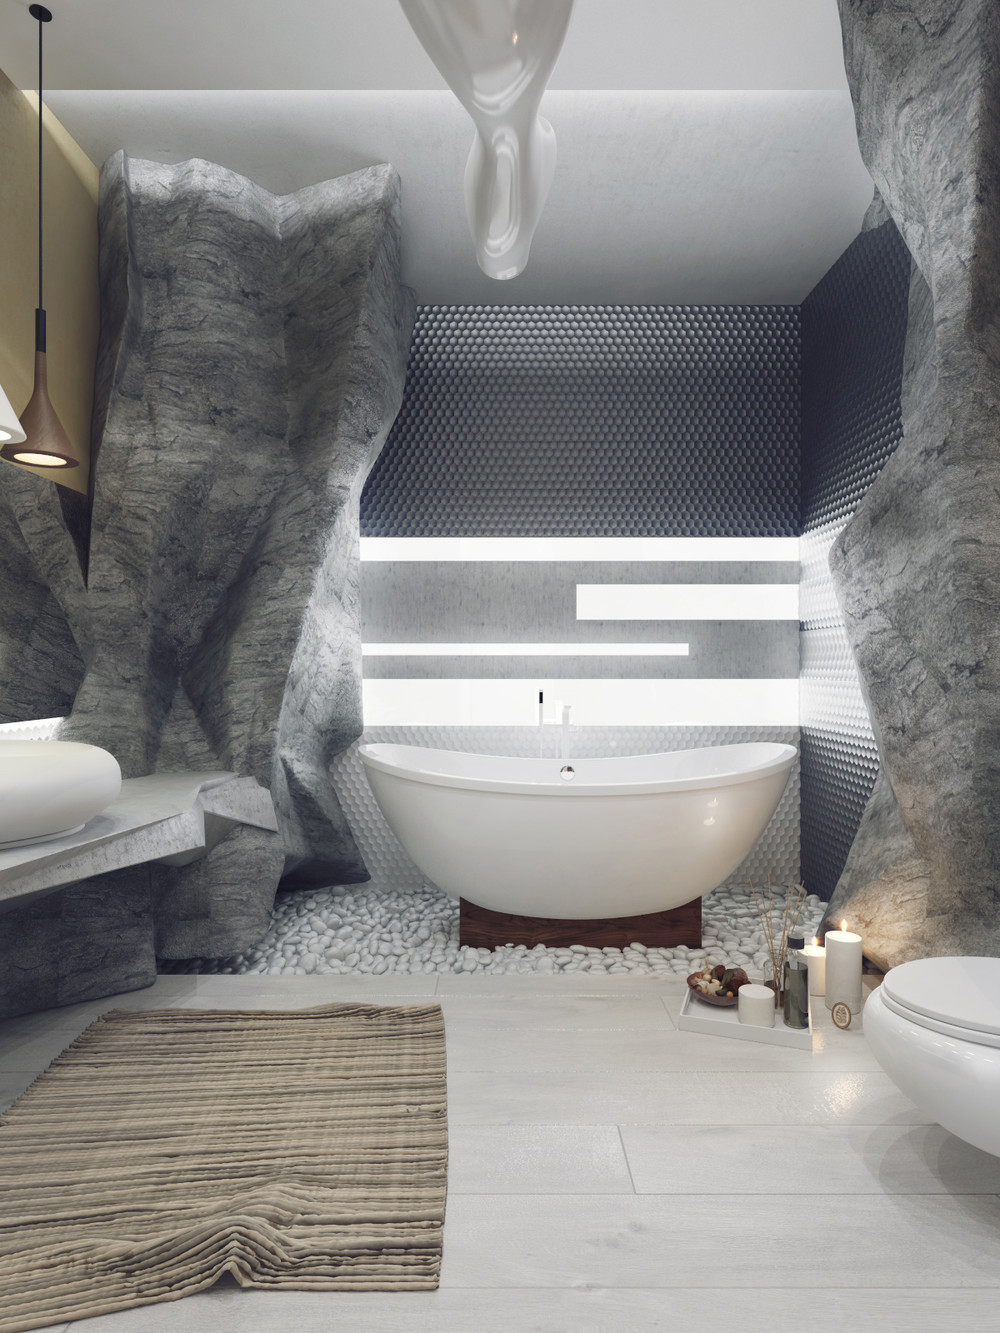 Luxury bathroom designs "width =" 1000 "height =" 1333 "srcset =" https://mileray.com/wp-content/uploads/2020/05/1588515923_285_30-Bathroom-Design-Ideas-Complete-With-Arranging-The-Small-Space.jpg 1000w, https: // mileray.com/wp-content/uploads/2016/08/Jesters-Philip-and-Catherine1-225x300.jpg 225w, https://mileray.com/wp-content/uploads/2016/08/Jesters-Philip-and -Catherine1-768x1024.jpg 768w, https://mileray.com/wp-content/uploads/2016/08/Jesters-Philip-and-Catherine1-696x928.jpg 696w, https://mileray.com/wp-content /uploads/2016/08/Jesters-Philip-and-Catherine1-315x420.jpg 315w "Sizes =" (maximum width: 1000px) 100vw, 1000px